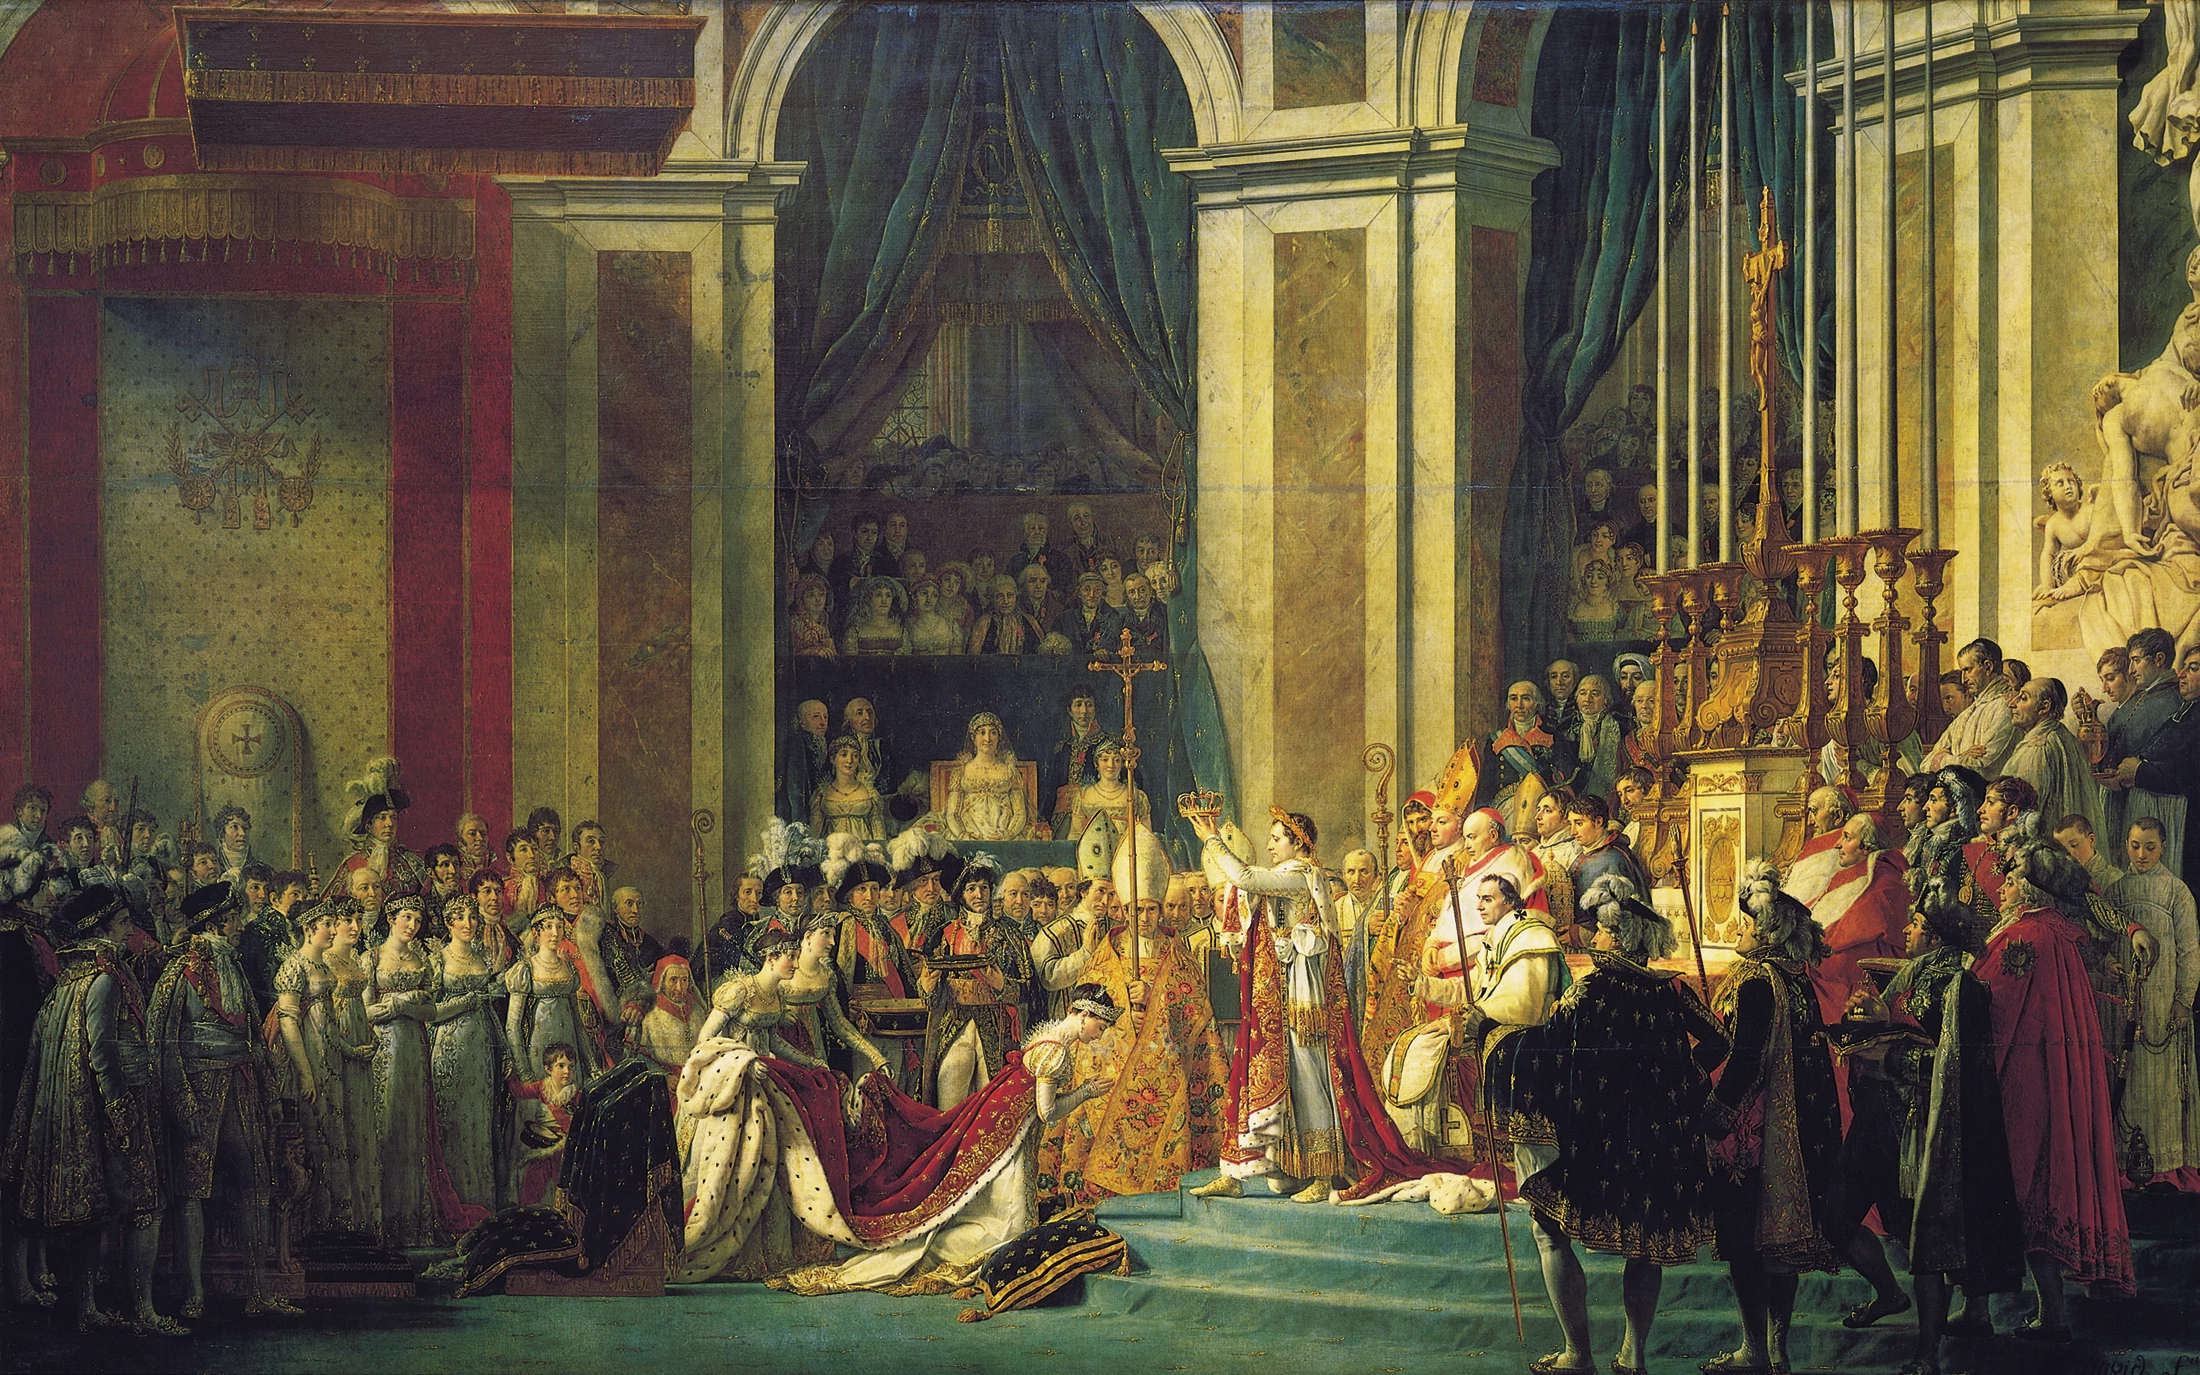 Consecration of the Emperor Napoleon I and Coronation of the Empress Josephine, Jacques-Louis David